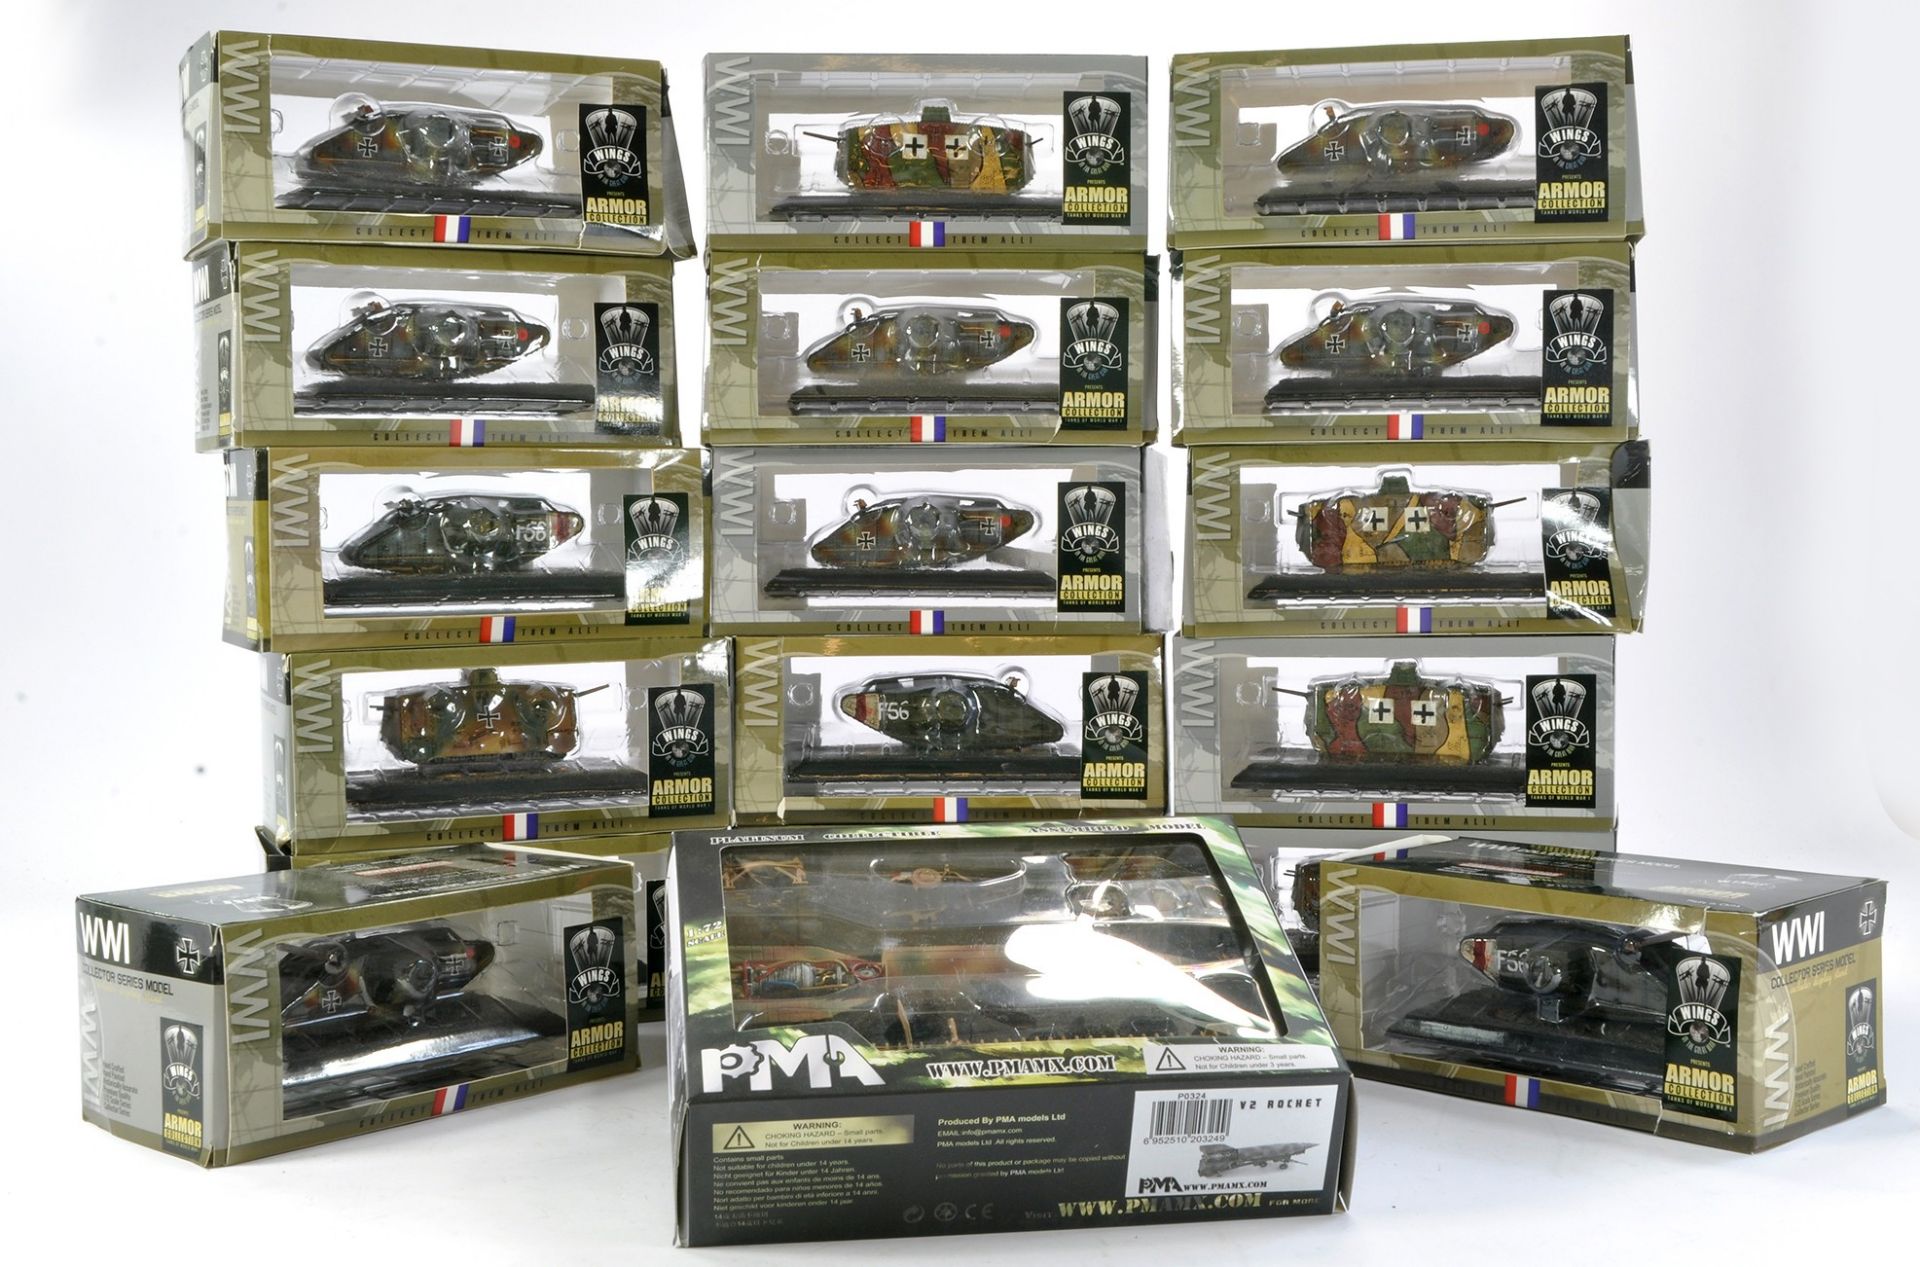 Seventeen Wings Armor Series WW1 Tanks in boxes, notorious for track damage so assume faults